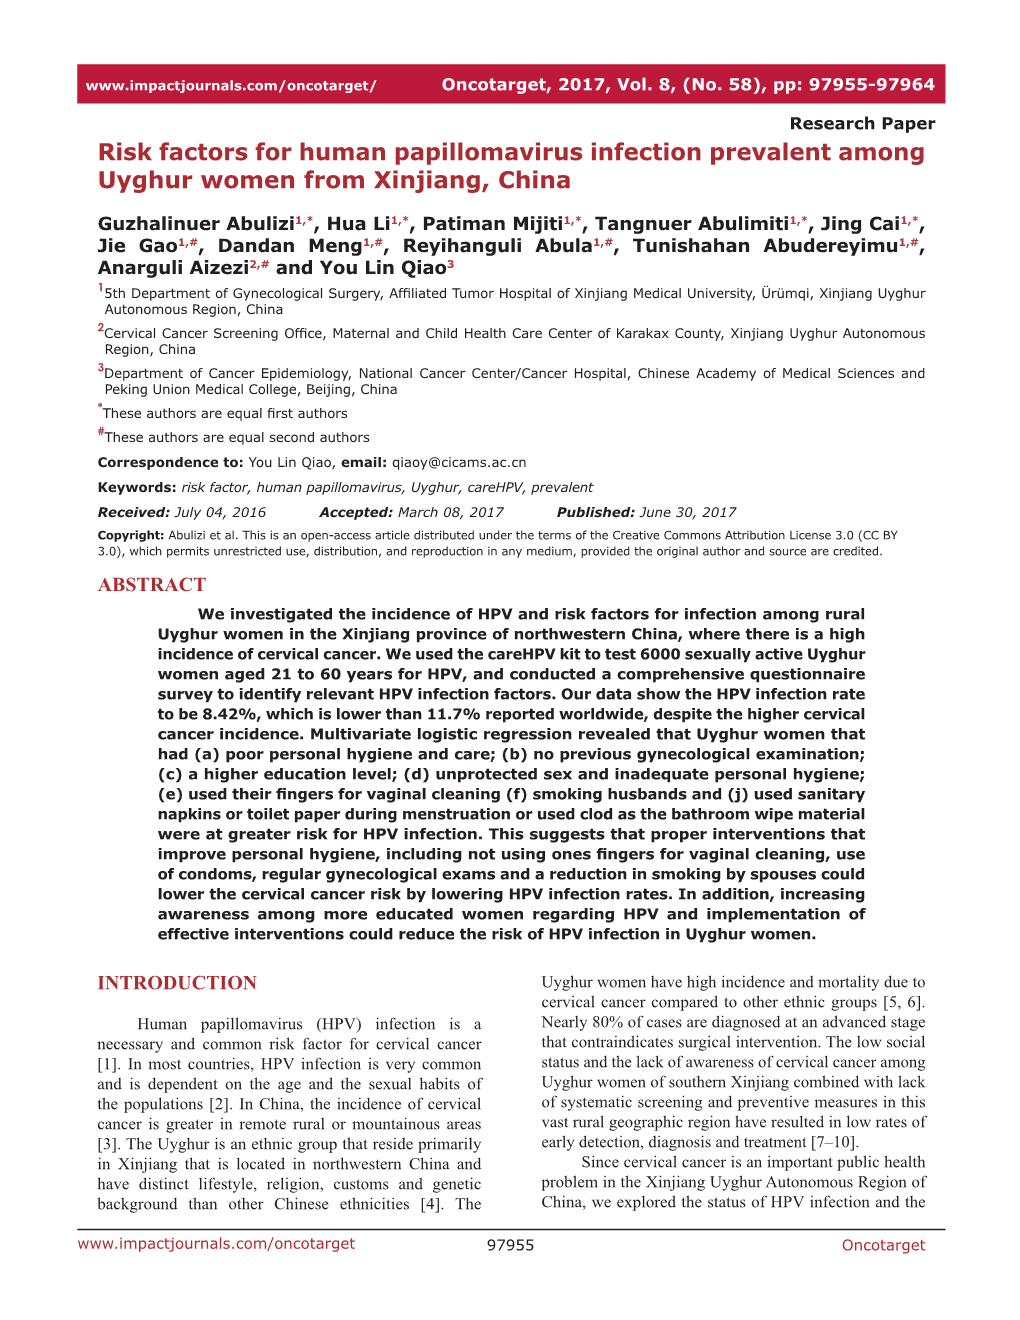 Risk Factors for Human Papillomavirus Infection Prevalent Among Uyghur Women from Xinjiang, China